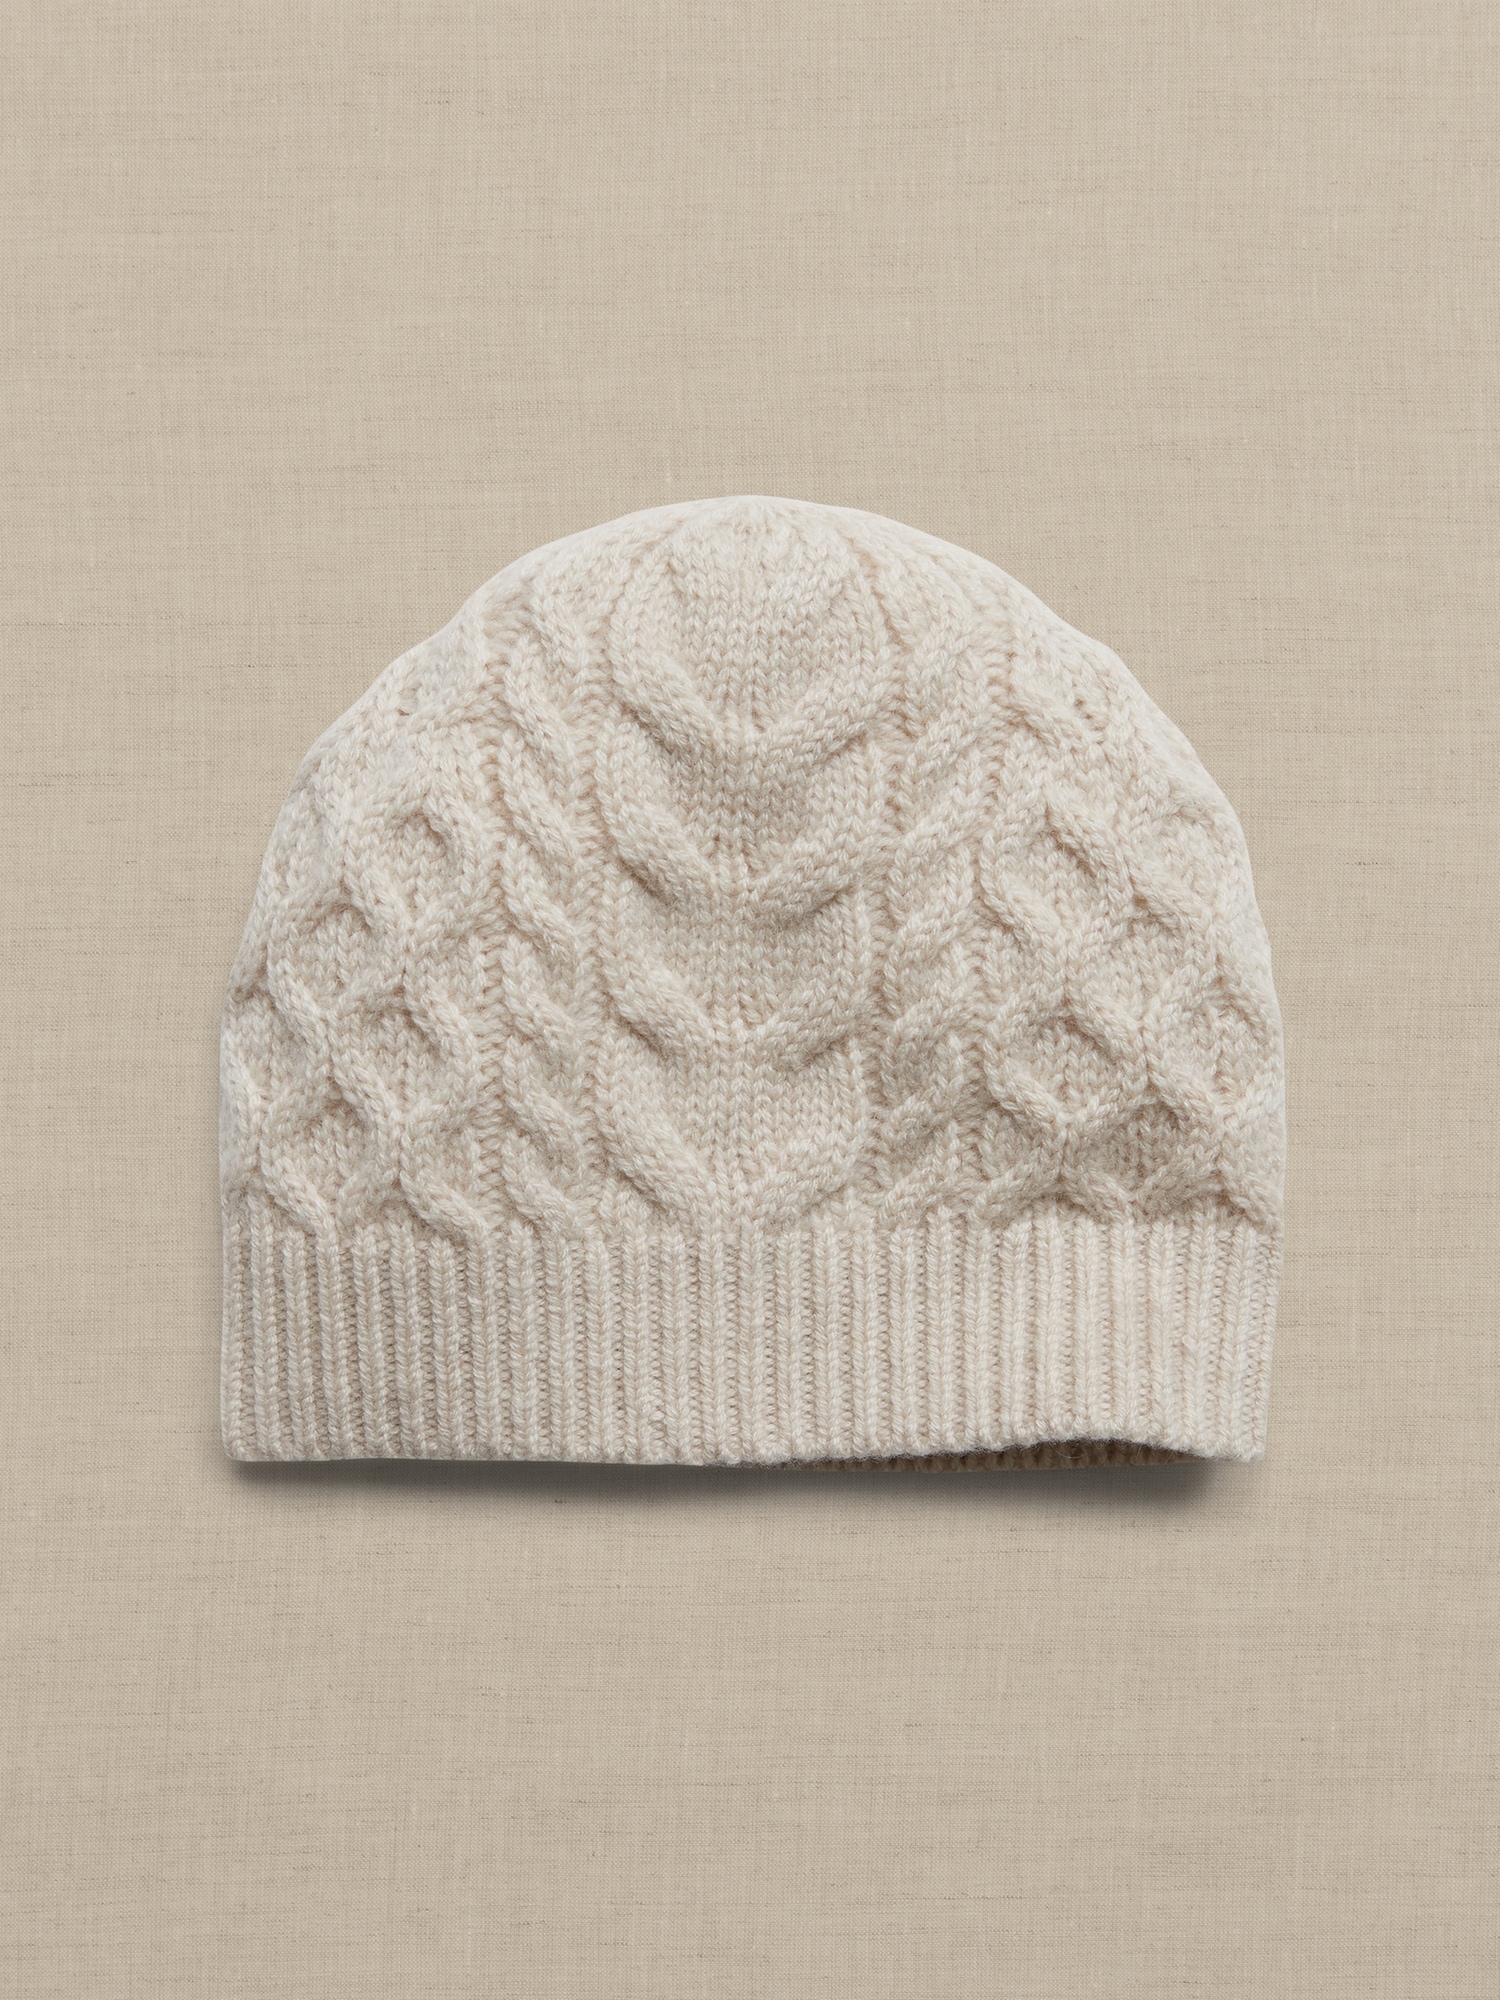 Banana Republic Merino-Cashmere Cable Beanie for Baby beige. 1